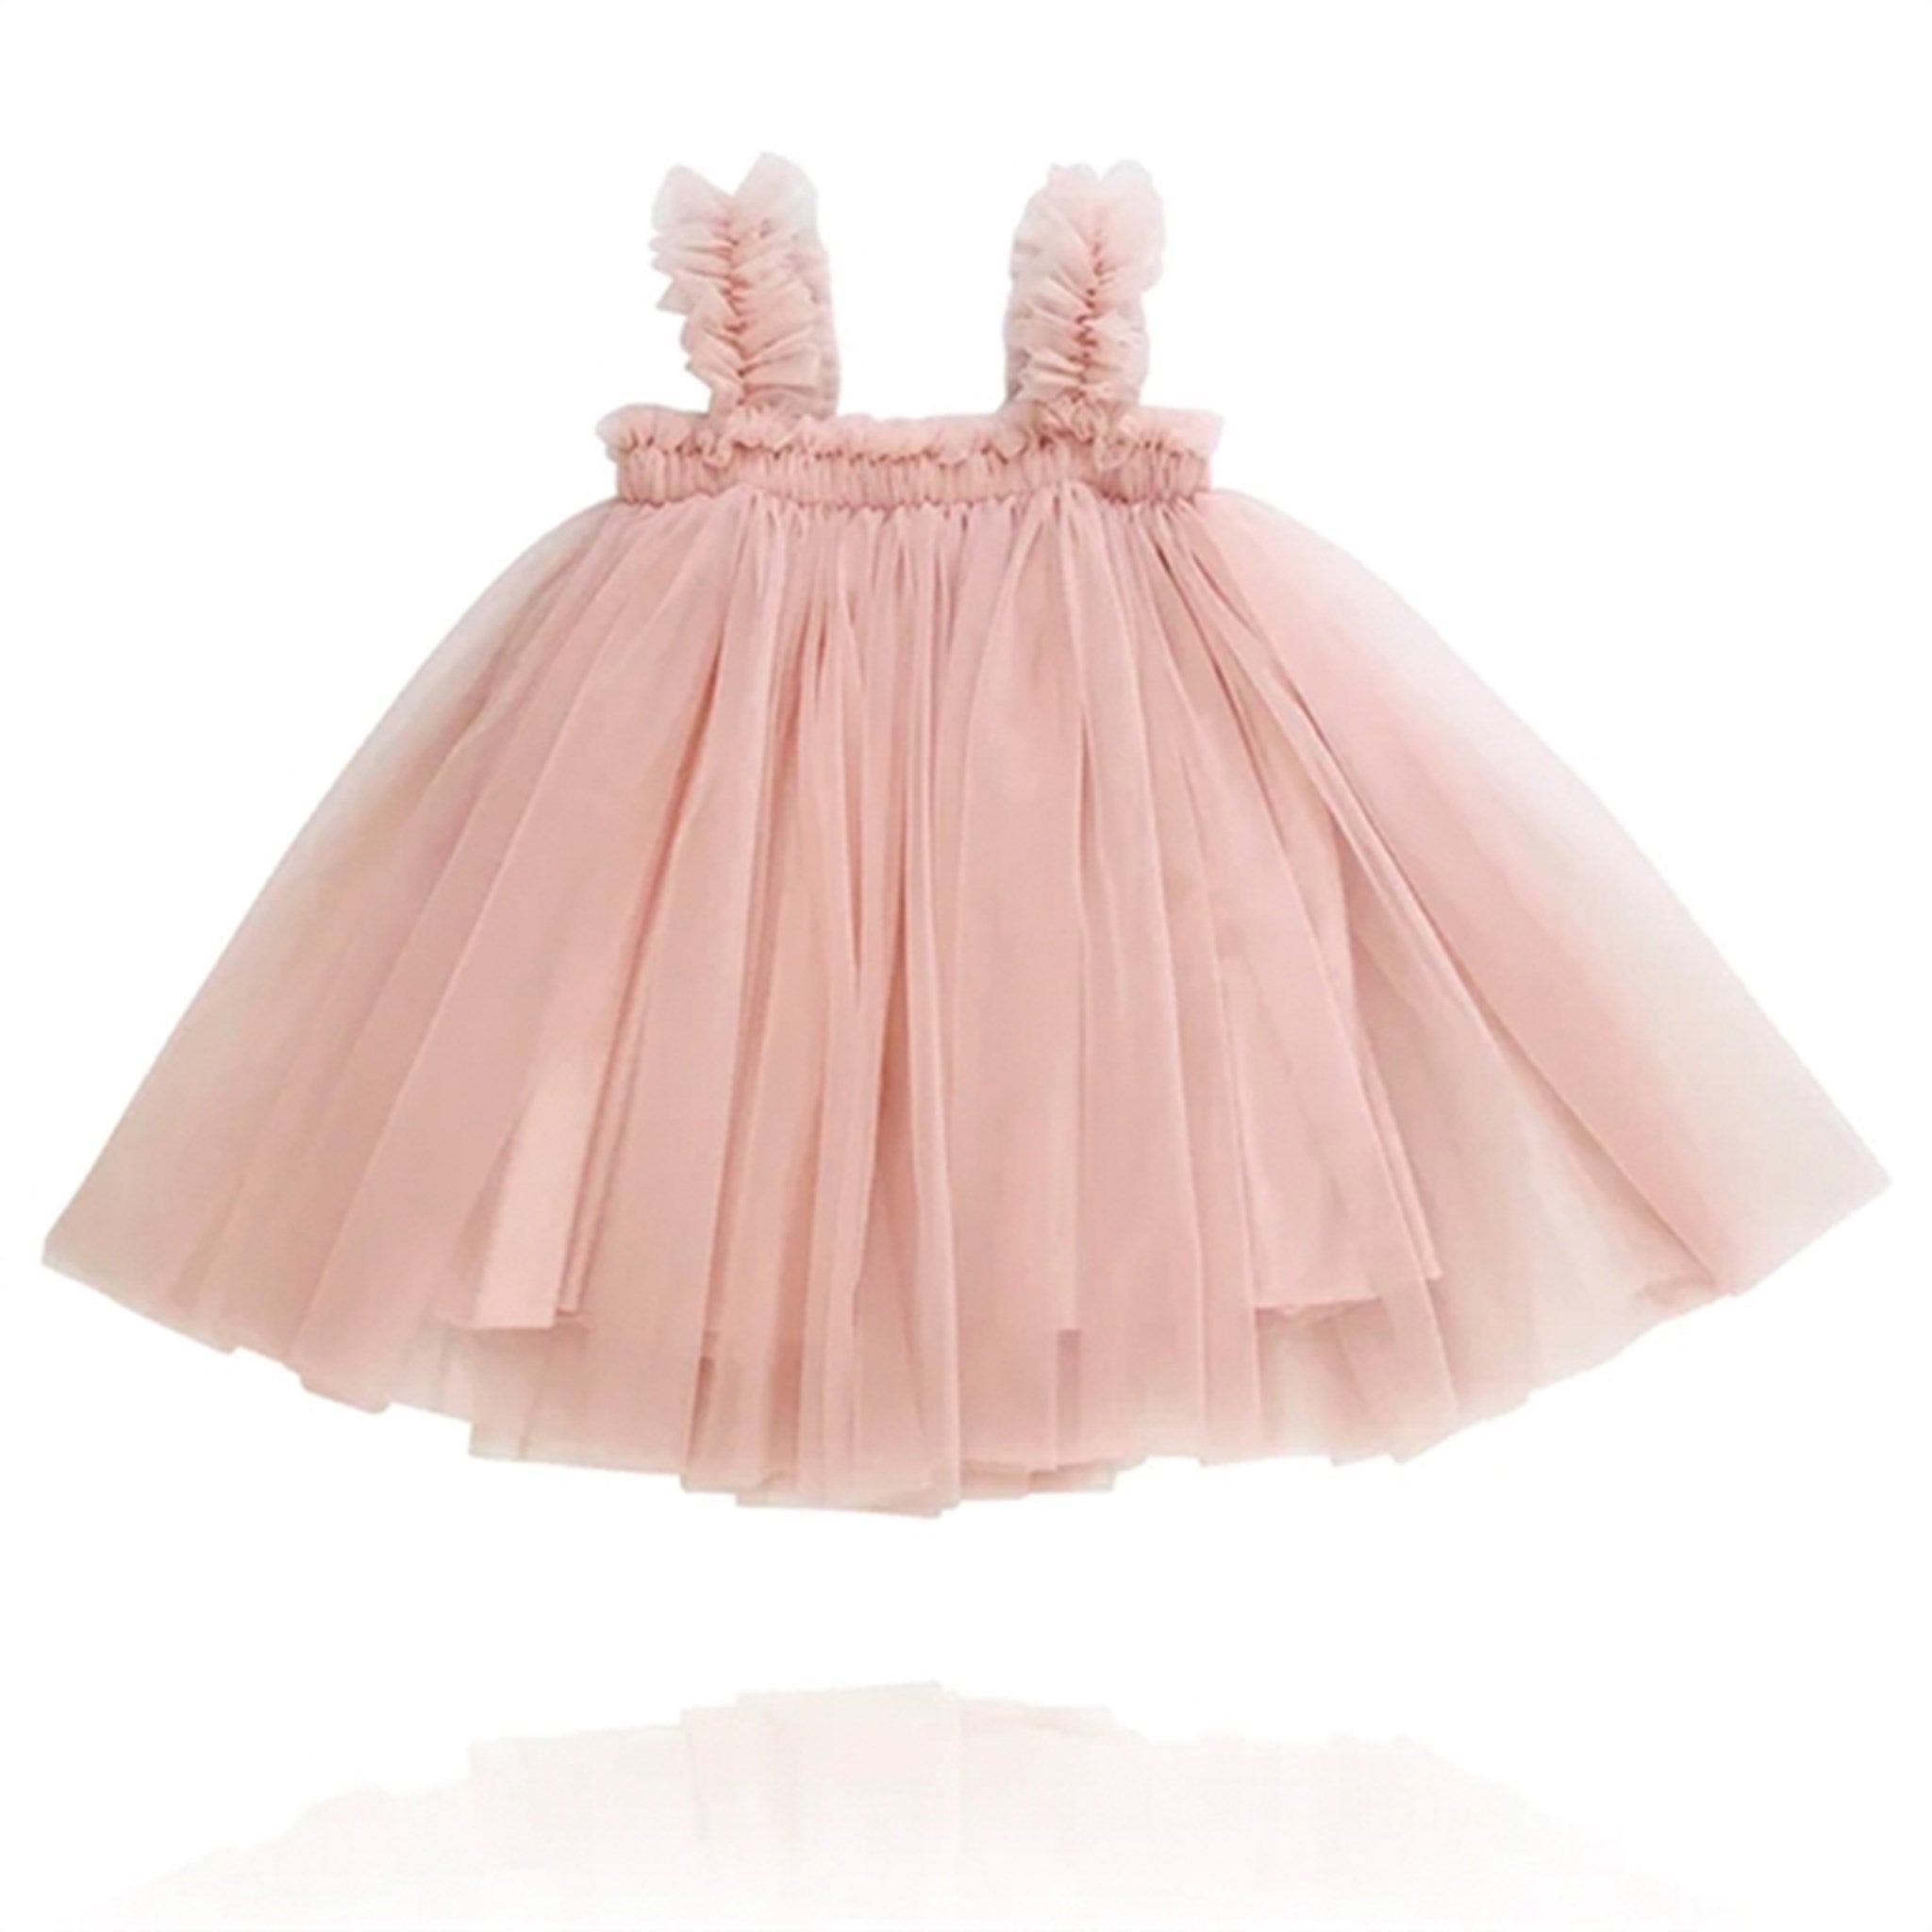 Dolly By Le Petit Tom 2 Way Tutu Dress Beach Cover Up Ballet Pink